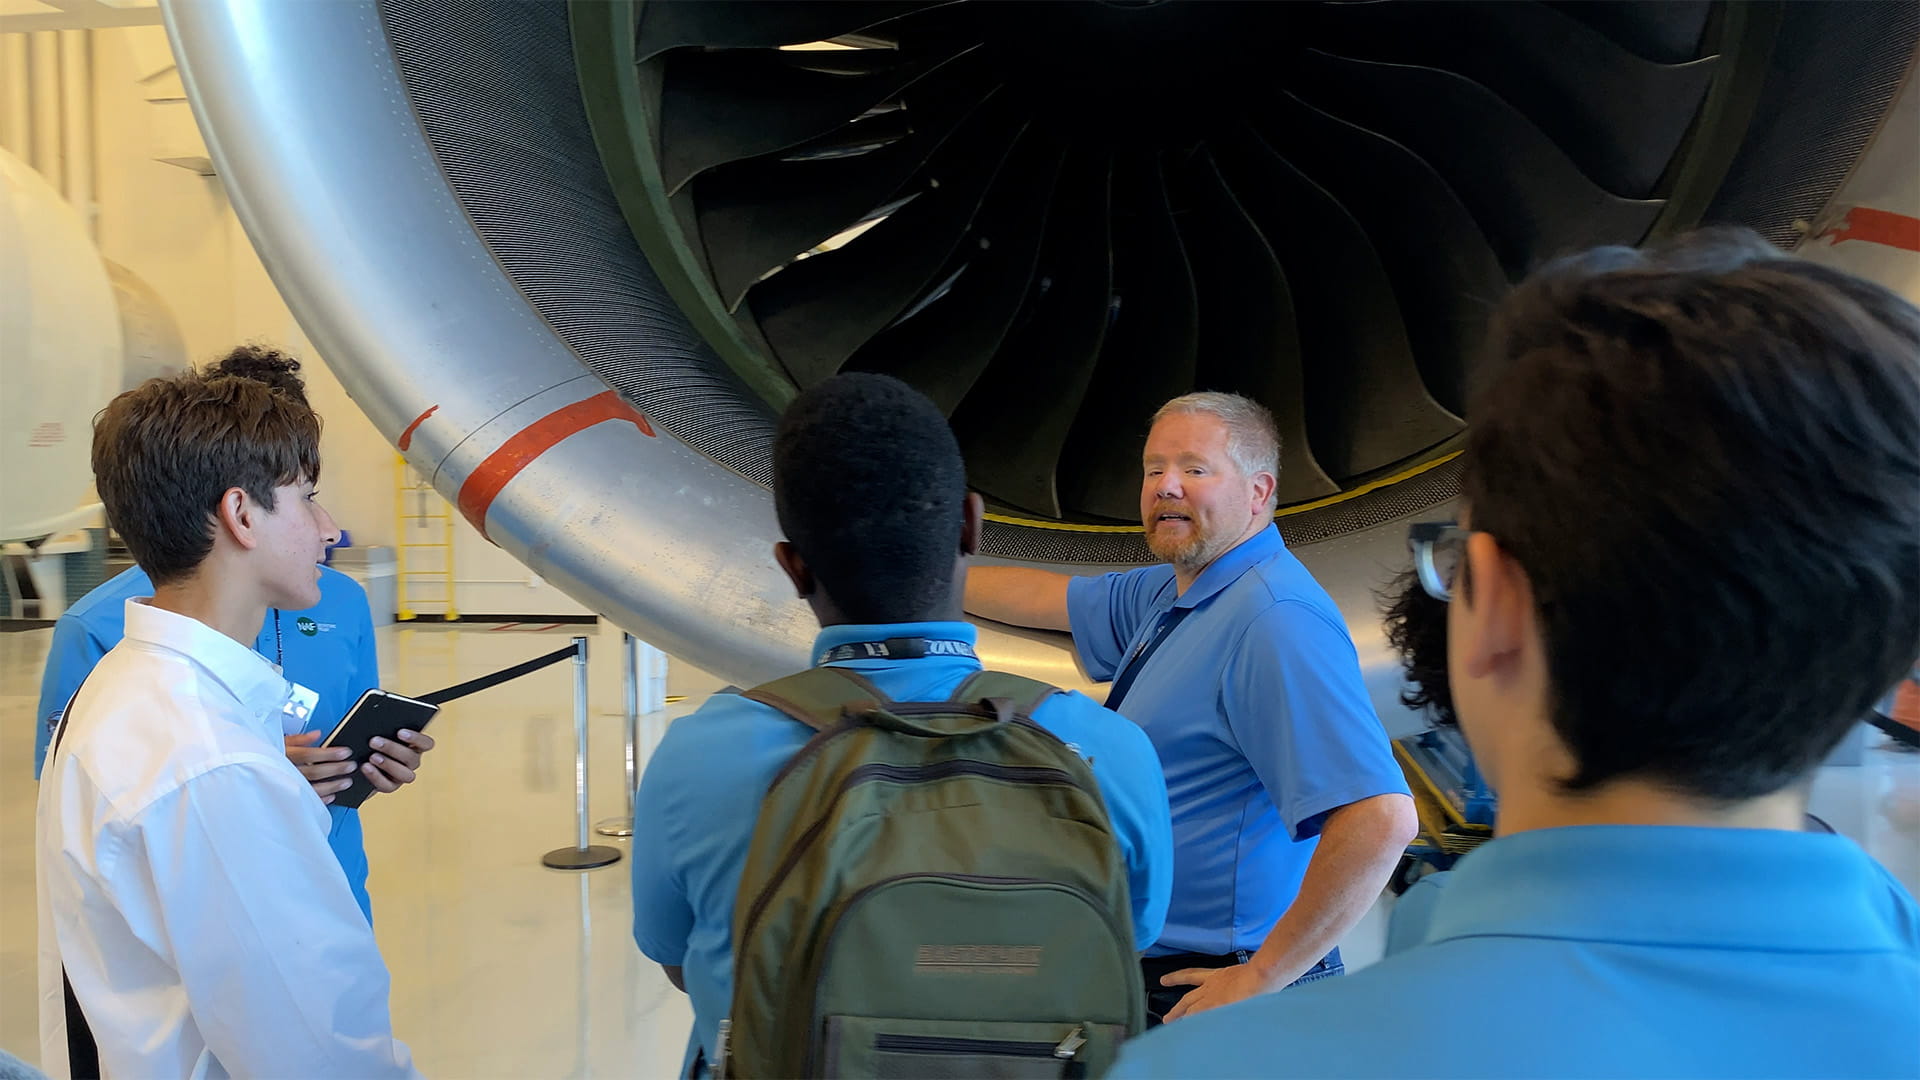 Students from NAF get an up-close look at a Pratt & Whitney engine as part of their internship